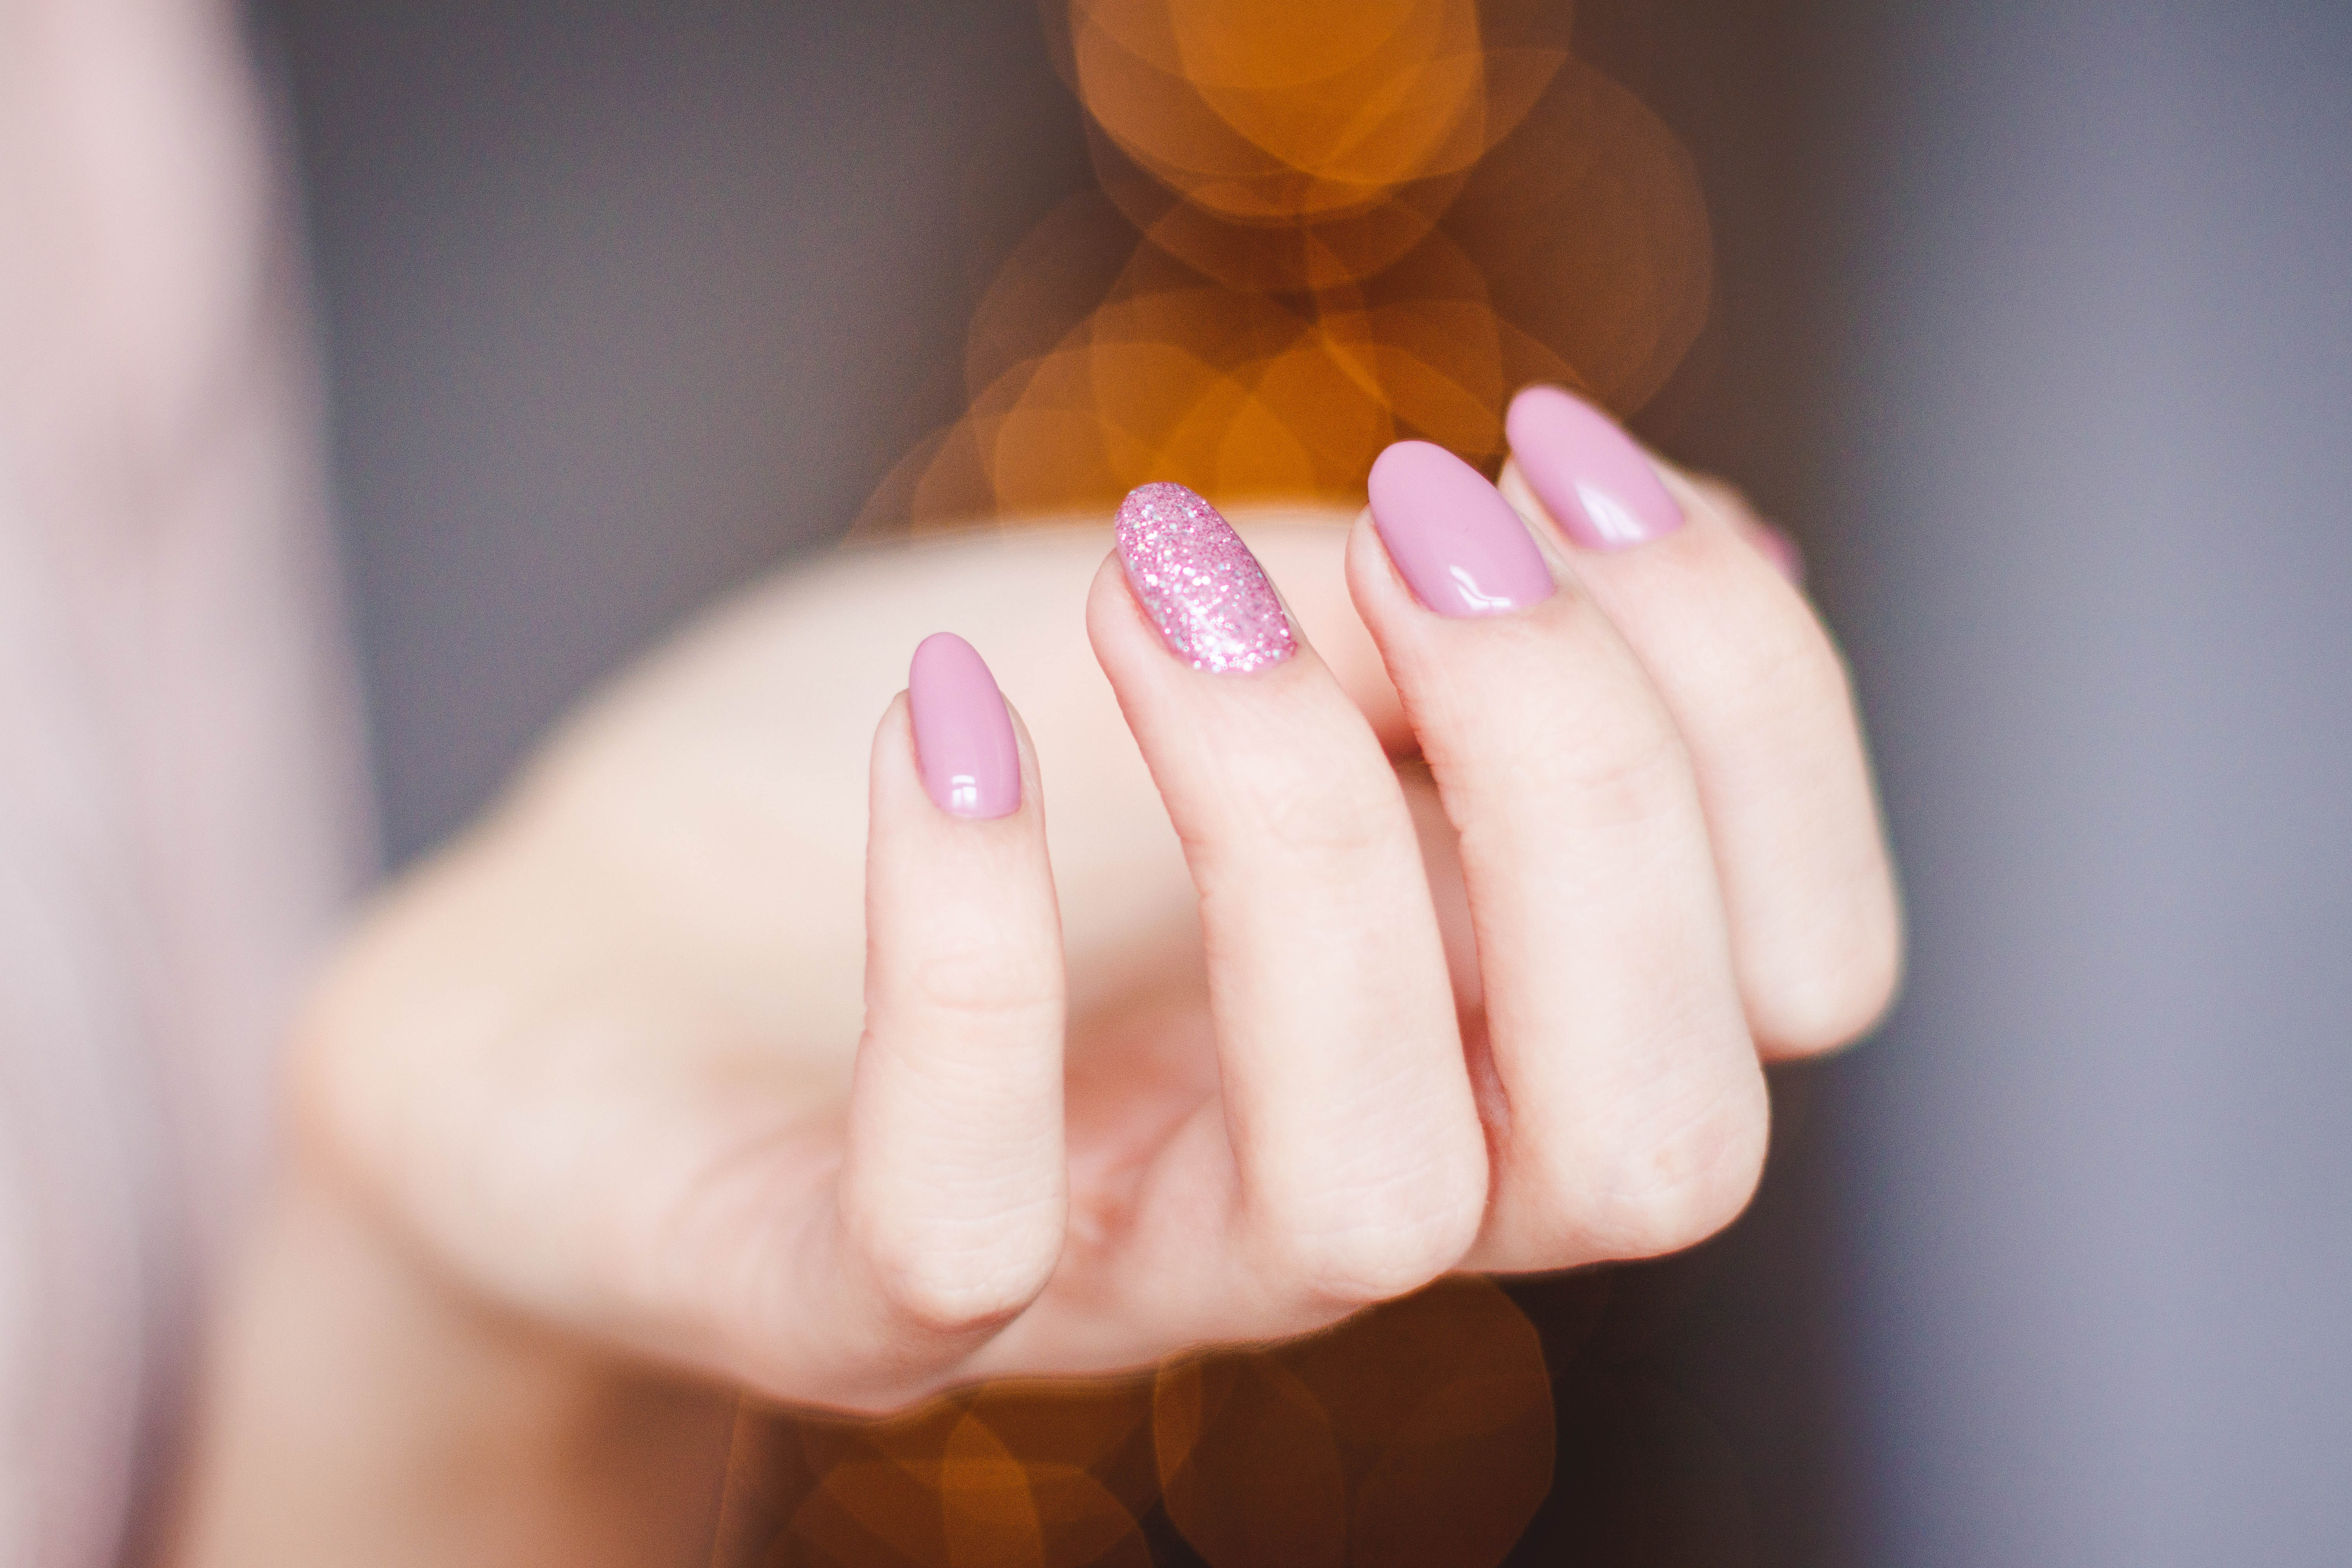 A single hand in focus show pink nails that have been manicured